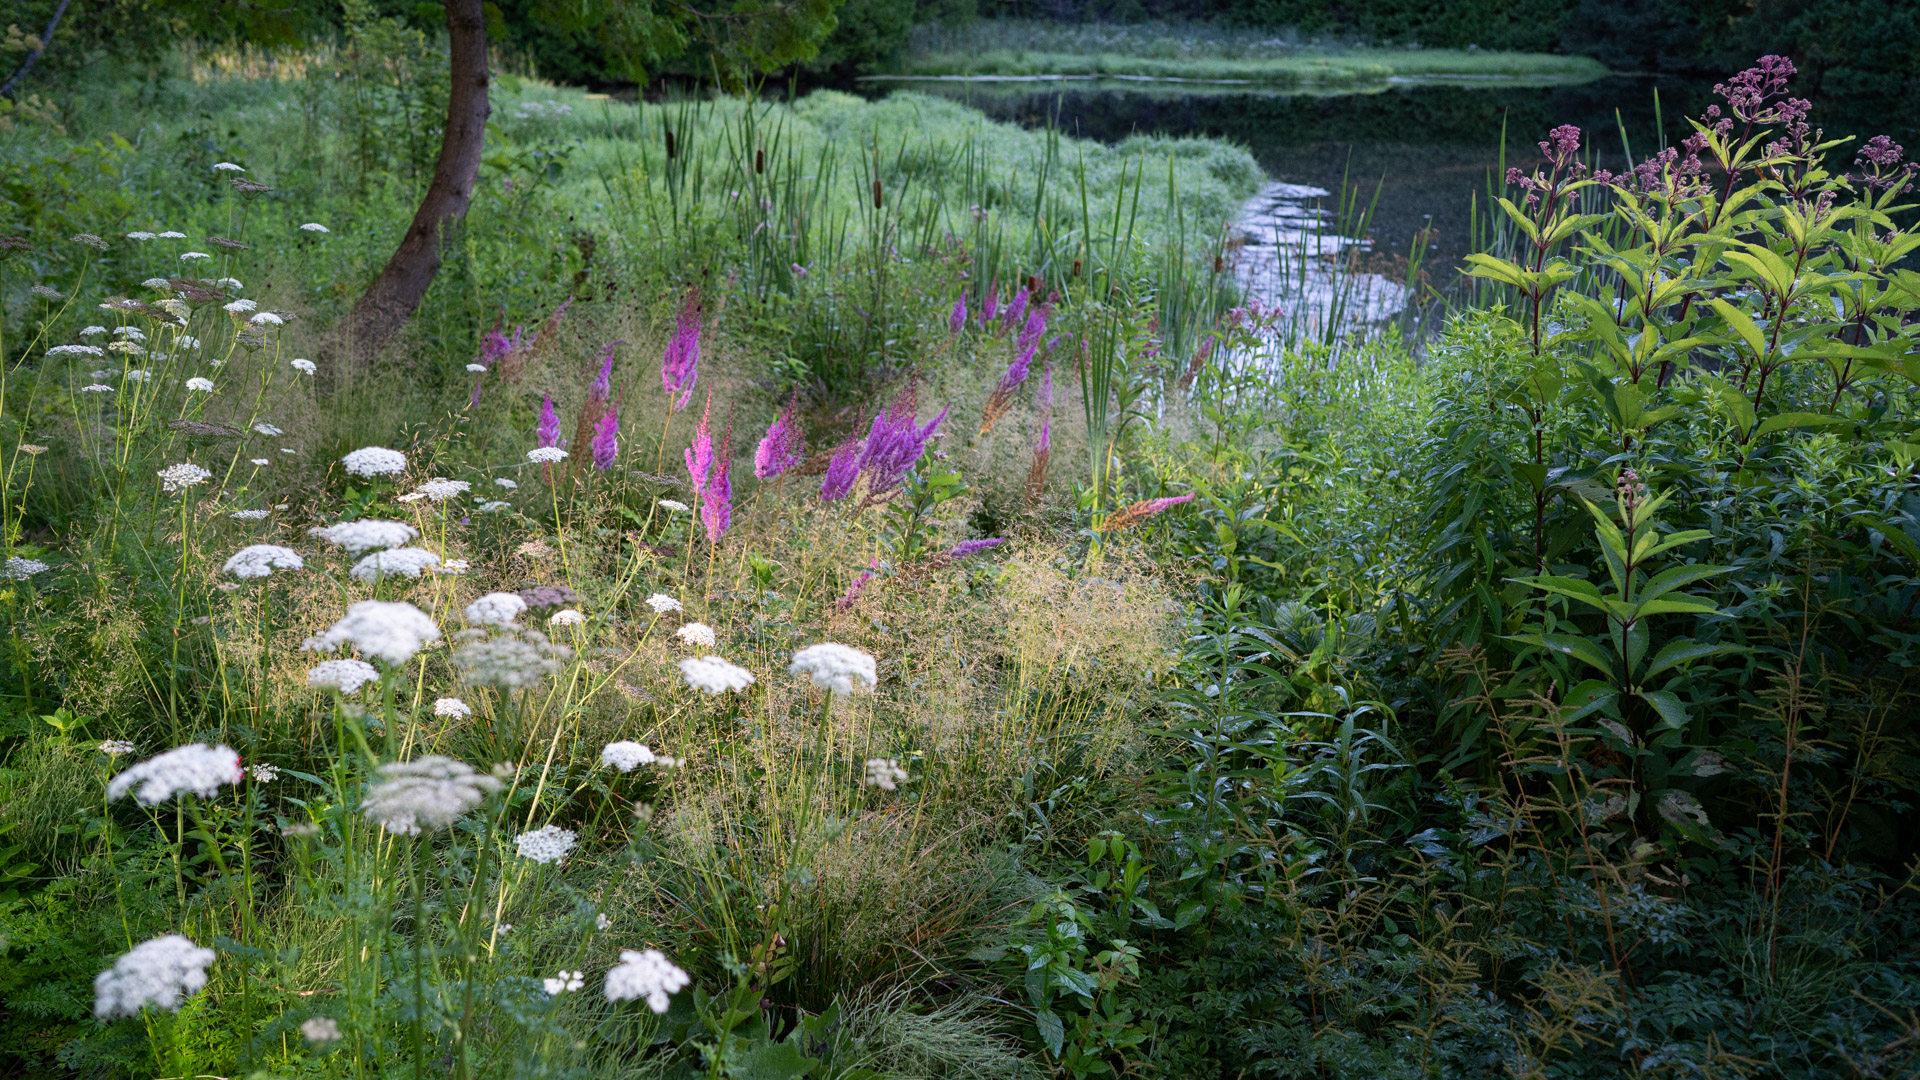 Speechless: A Northern Garden Comes into its Own